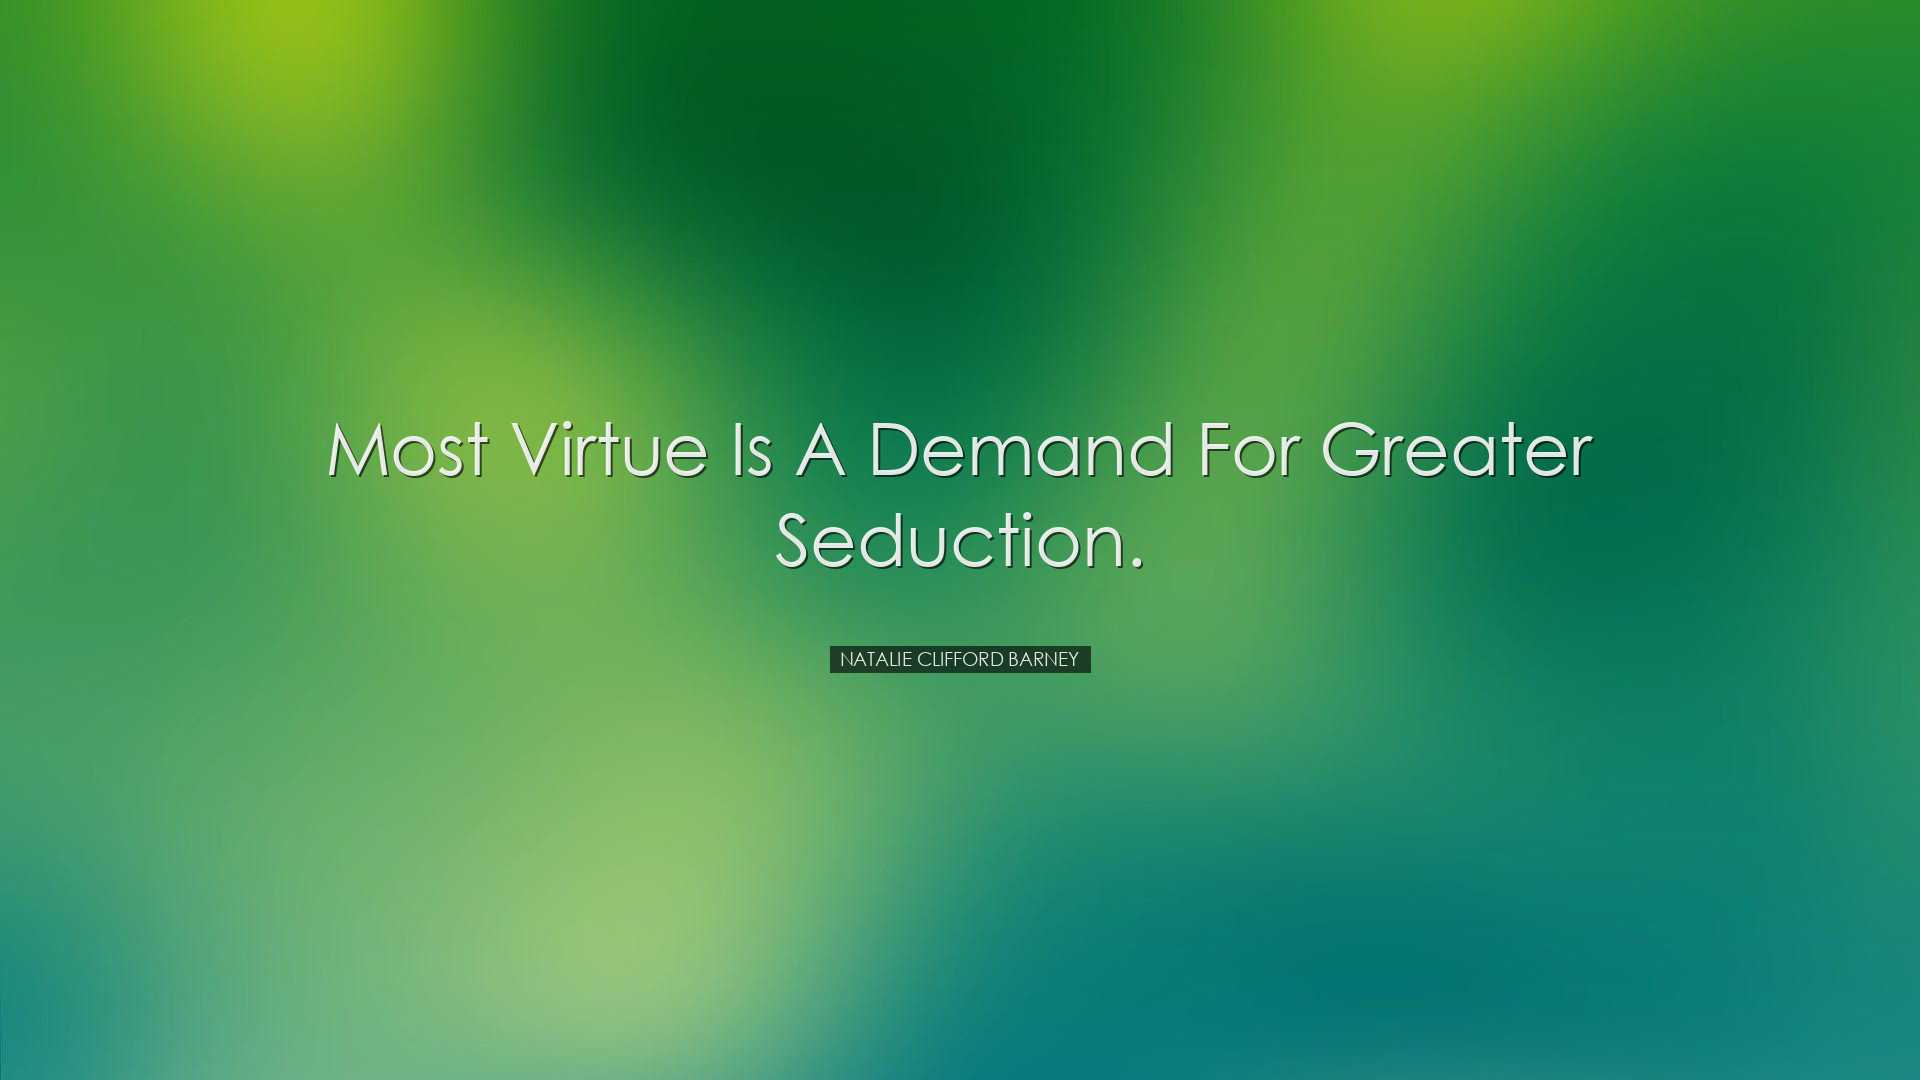 Most virtue is a demand for greater seduction. - Natalie Clifford